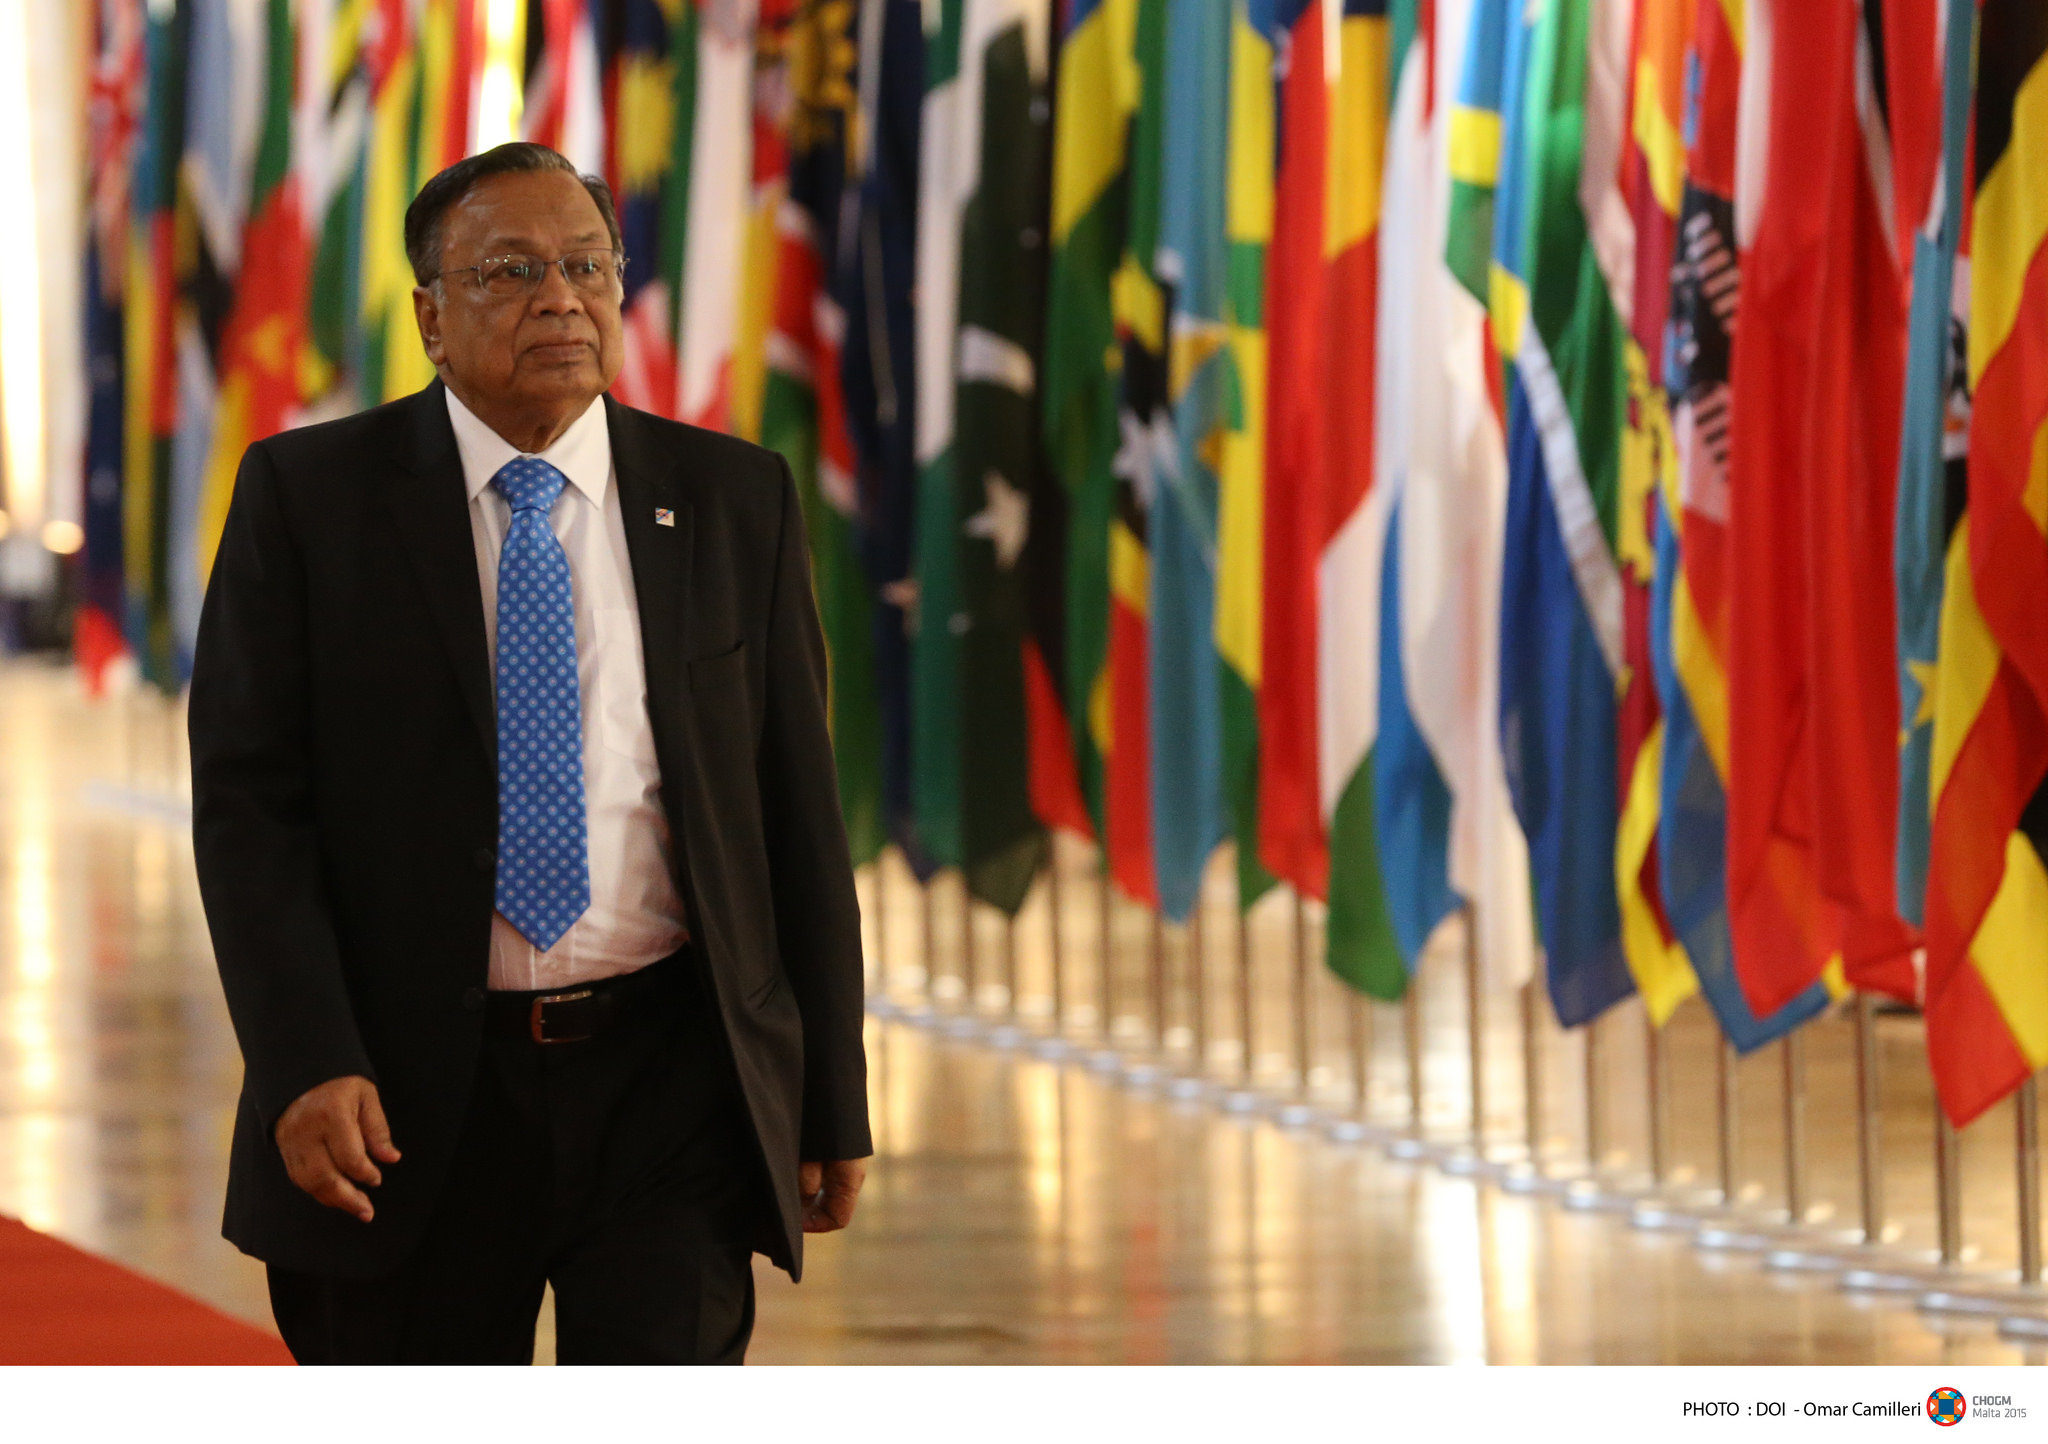 A.H. Mahmood Ali, Minister for Foreign Affairs of the People’s Republic of Bangladesh, appears at the  Commonwealth Heads of Government Meeting in Malta in 2015. Photo: Flickr / CHOGM Malta